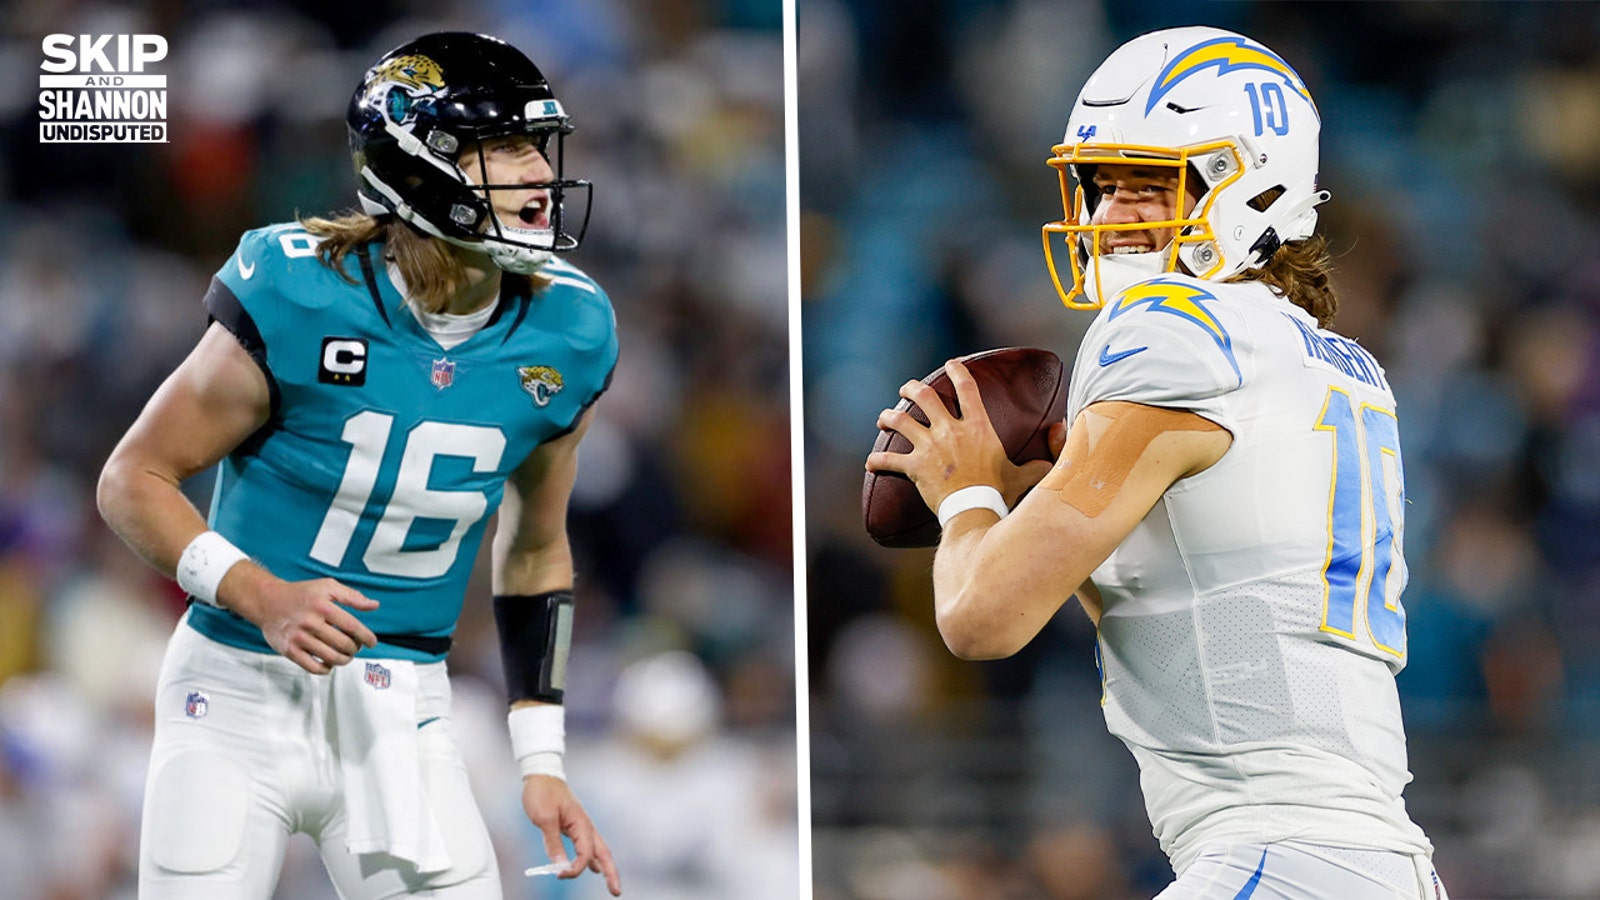 The Jaguars shocked the Chargers by erasing a 27-0 deficit 